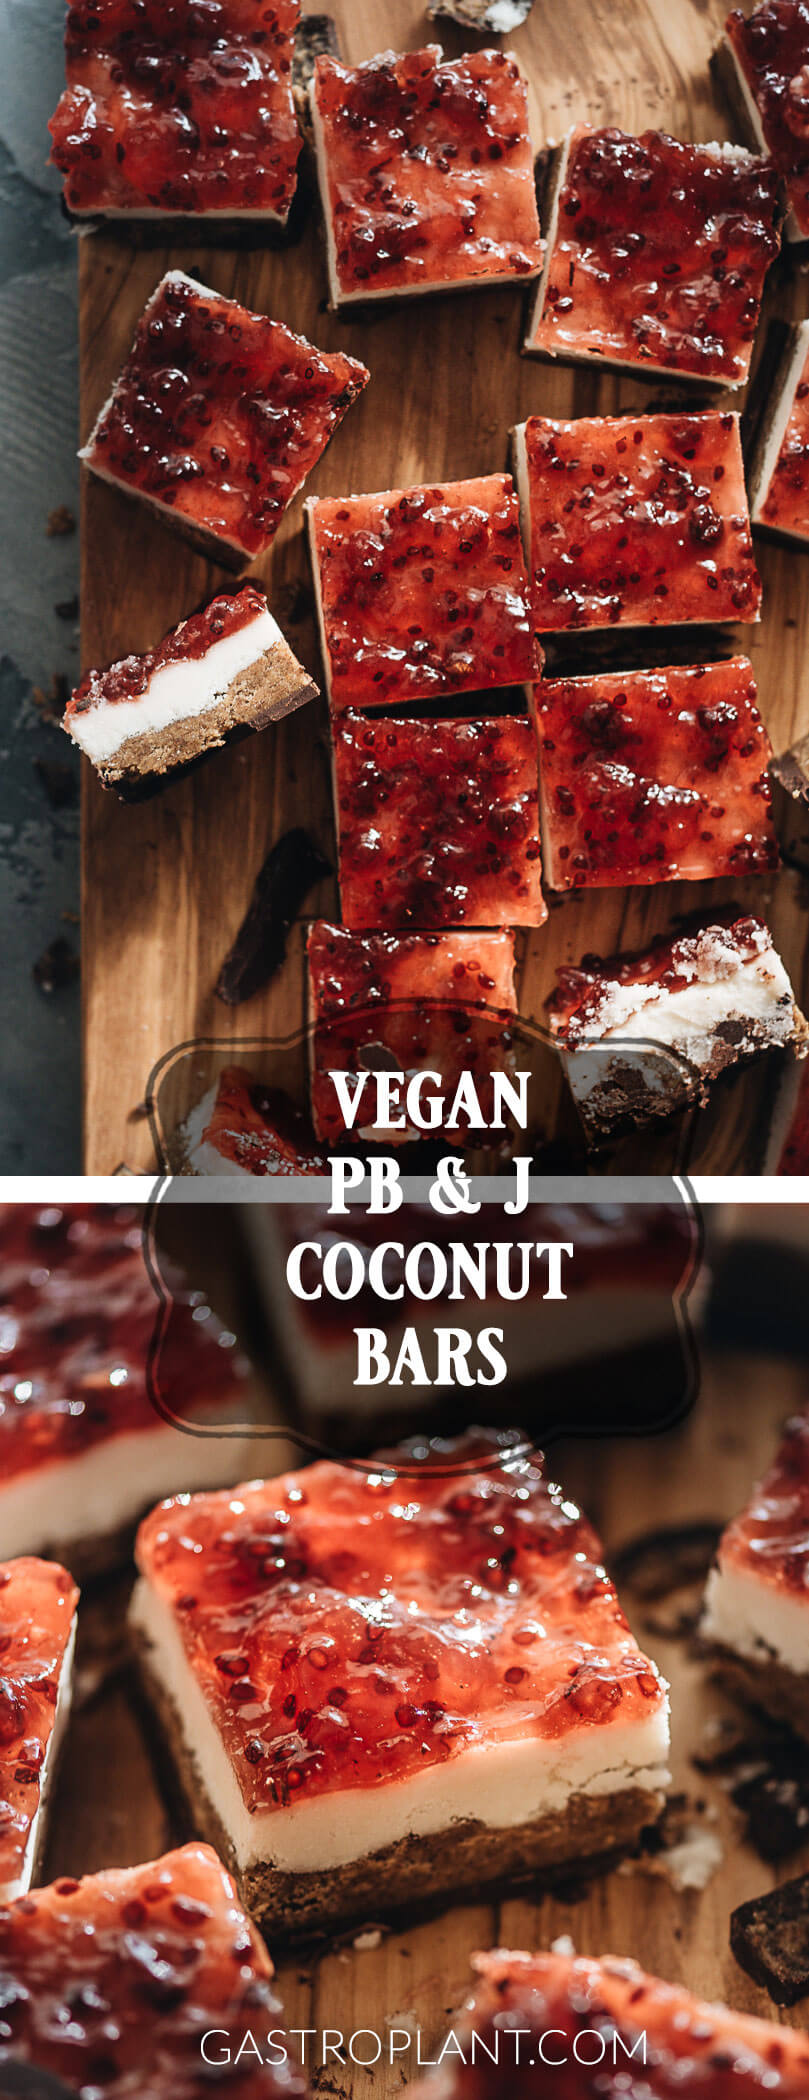 Vegan chocolate coconut peanut butter and jelly bars collage